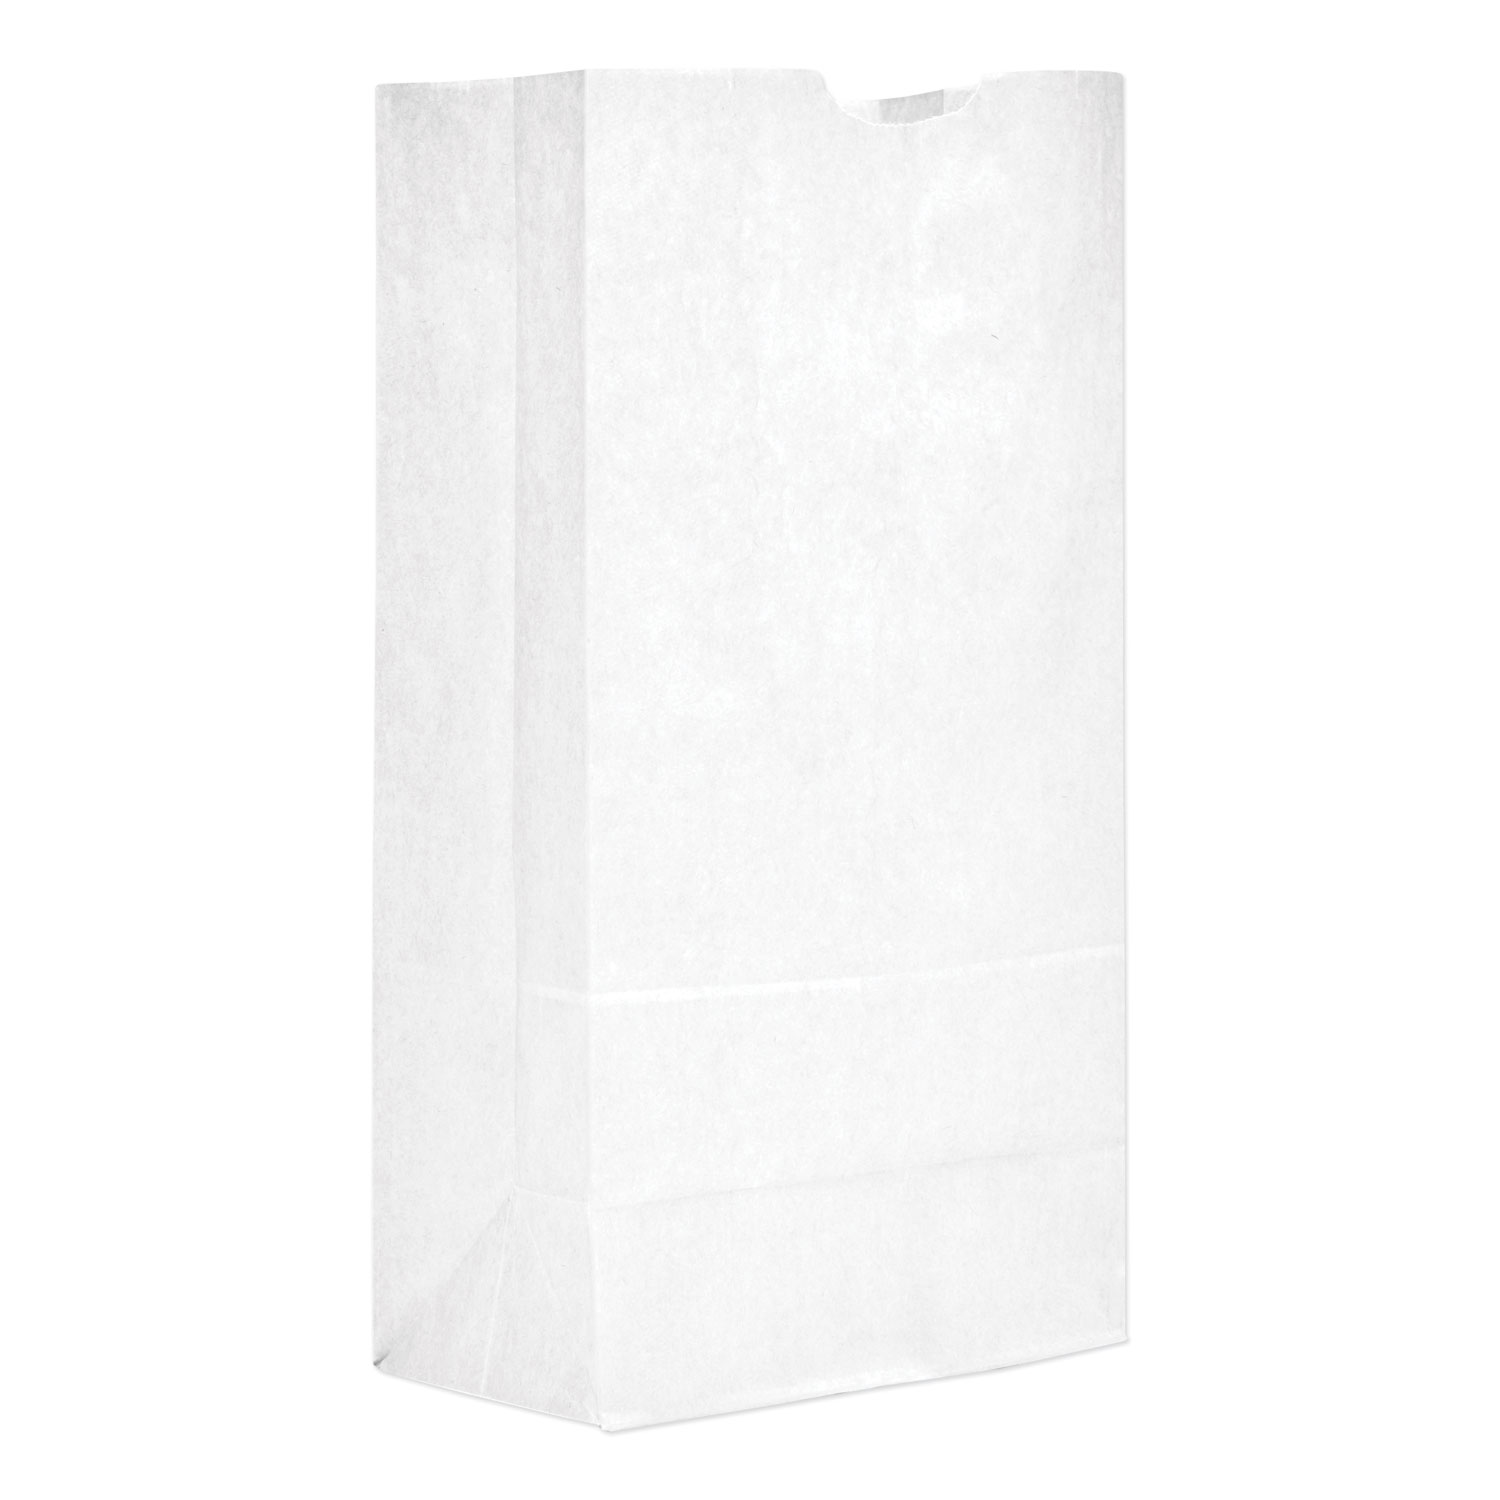  General 51040 Grocery Paper Bags, 40 lbs Capacity, #20, 8.25w x 5.94d x 16.13h, White, 500 Bags (BAGGW20500) 